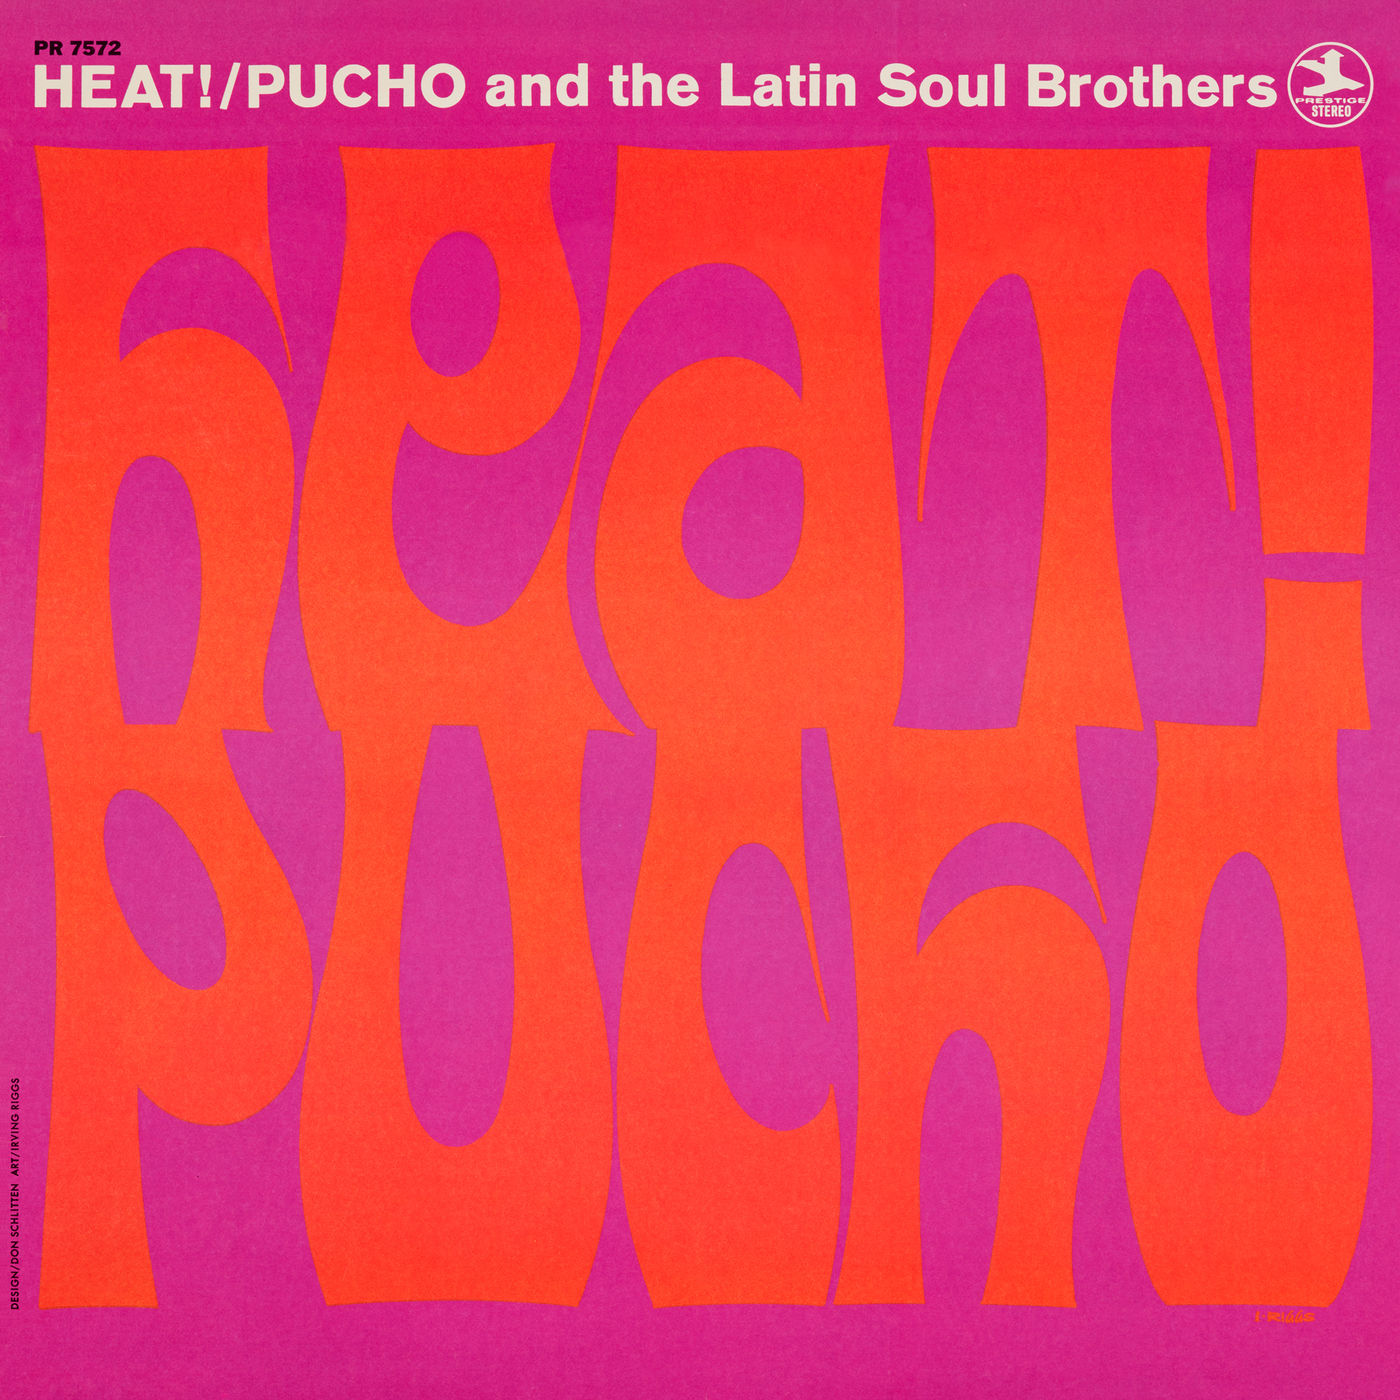 Pucho And The Latin Soul Brothers – Heat! (1968/2021) [FLAC 24bit/192kHz]